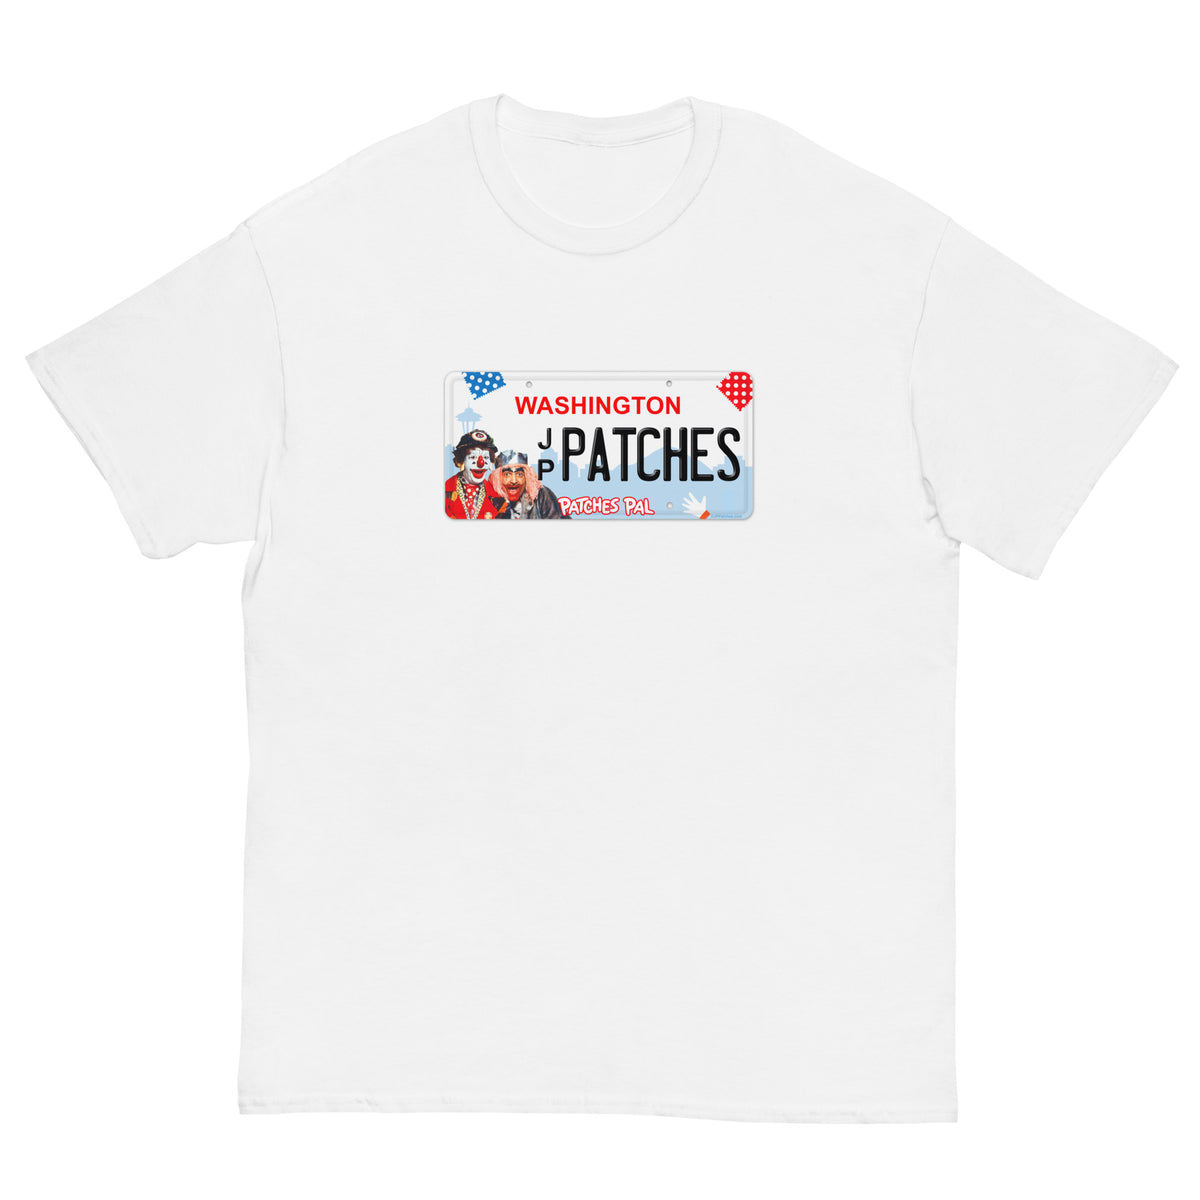 Patches Pal License Plate Shirt – JPPatches.com